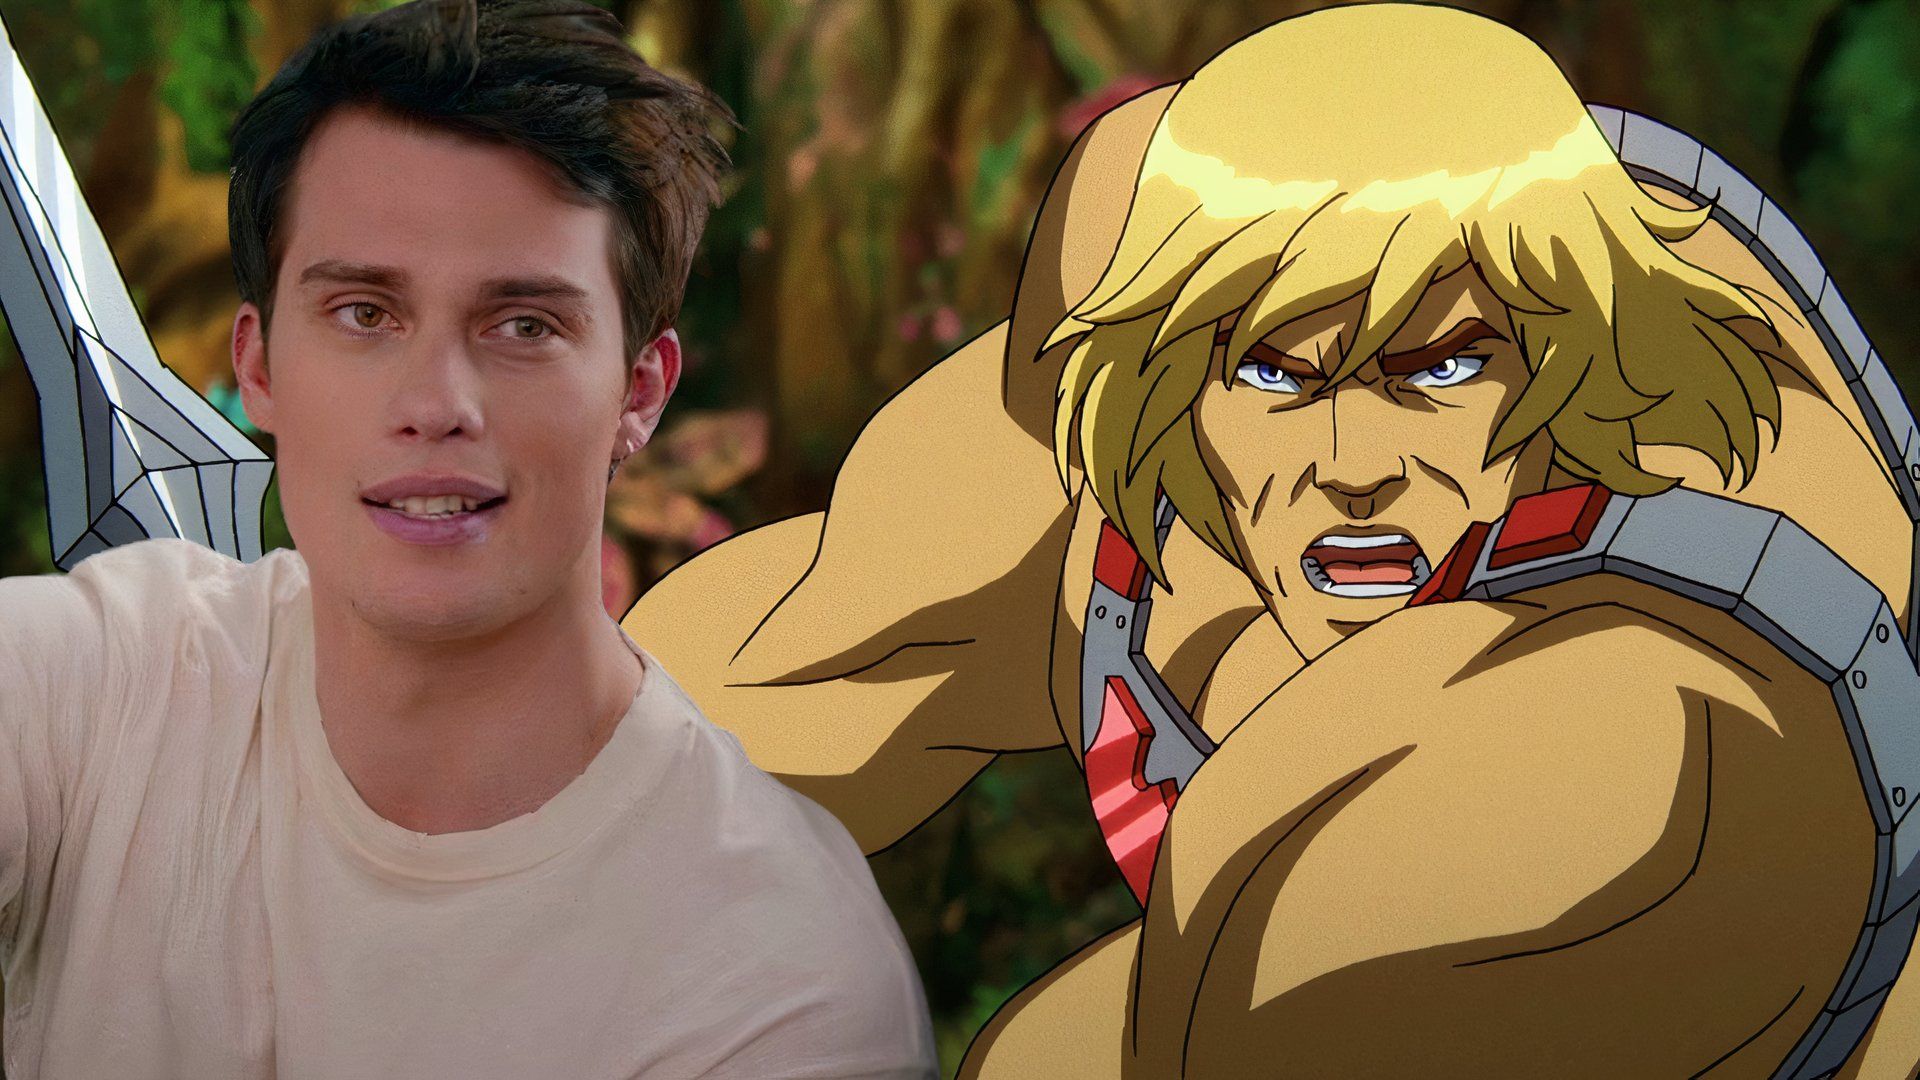 Nicholas Galitzine in The Idea of You over an image of He-Man from Master of the Universe